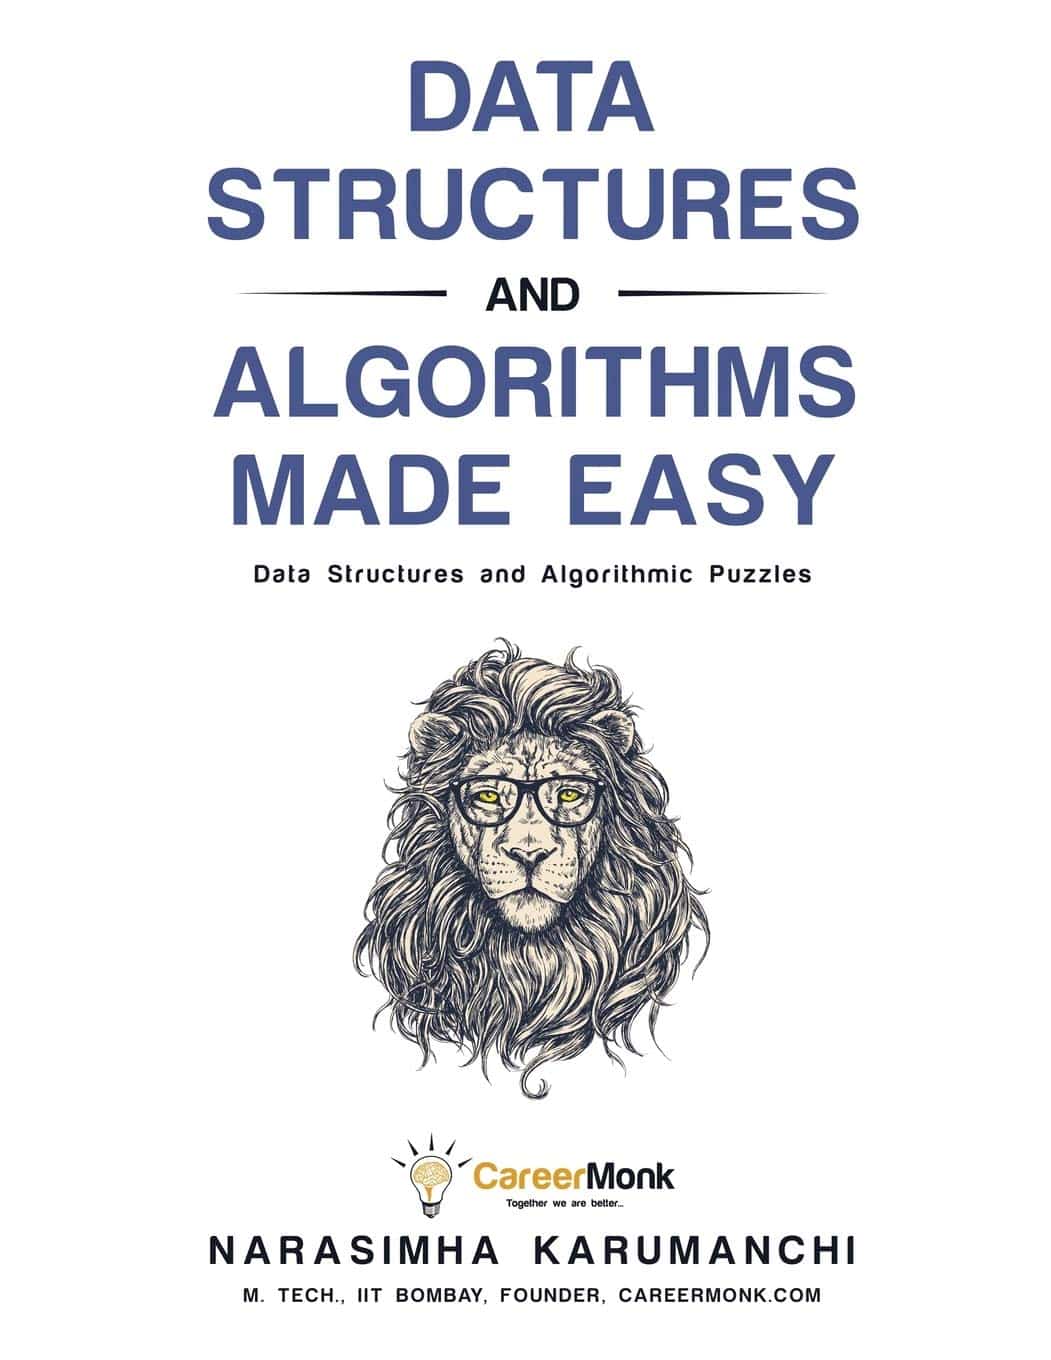 15 Best Data Structures And Algorithms Books 58 700 Readers Choice